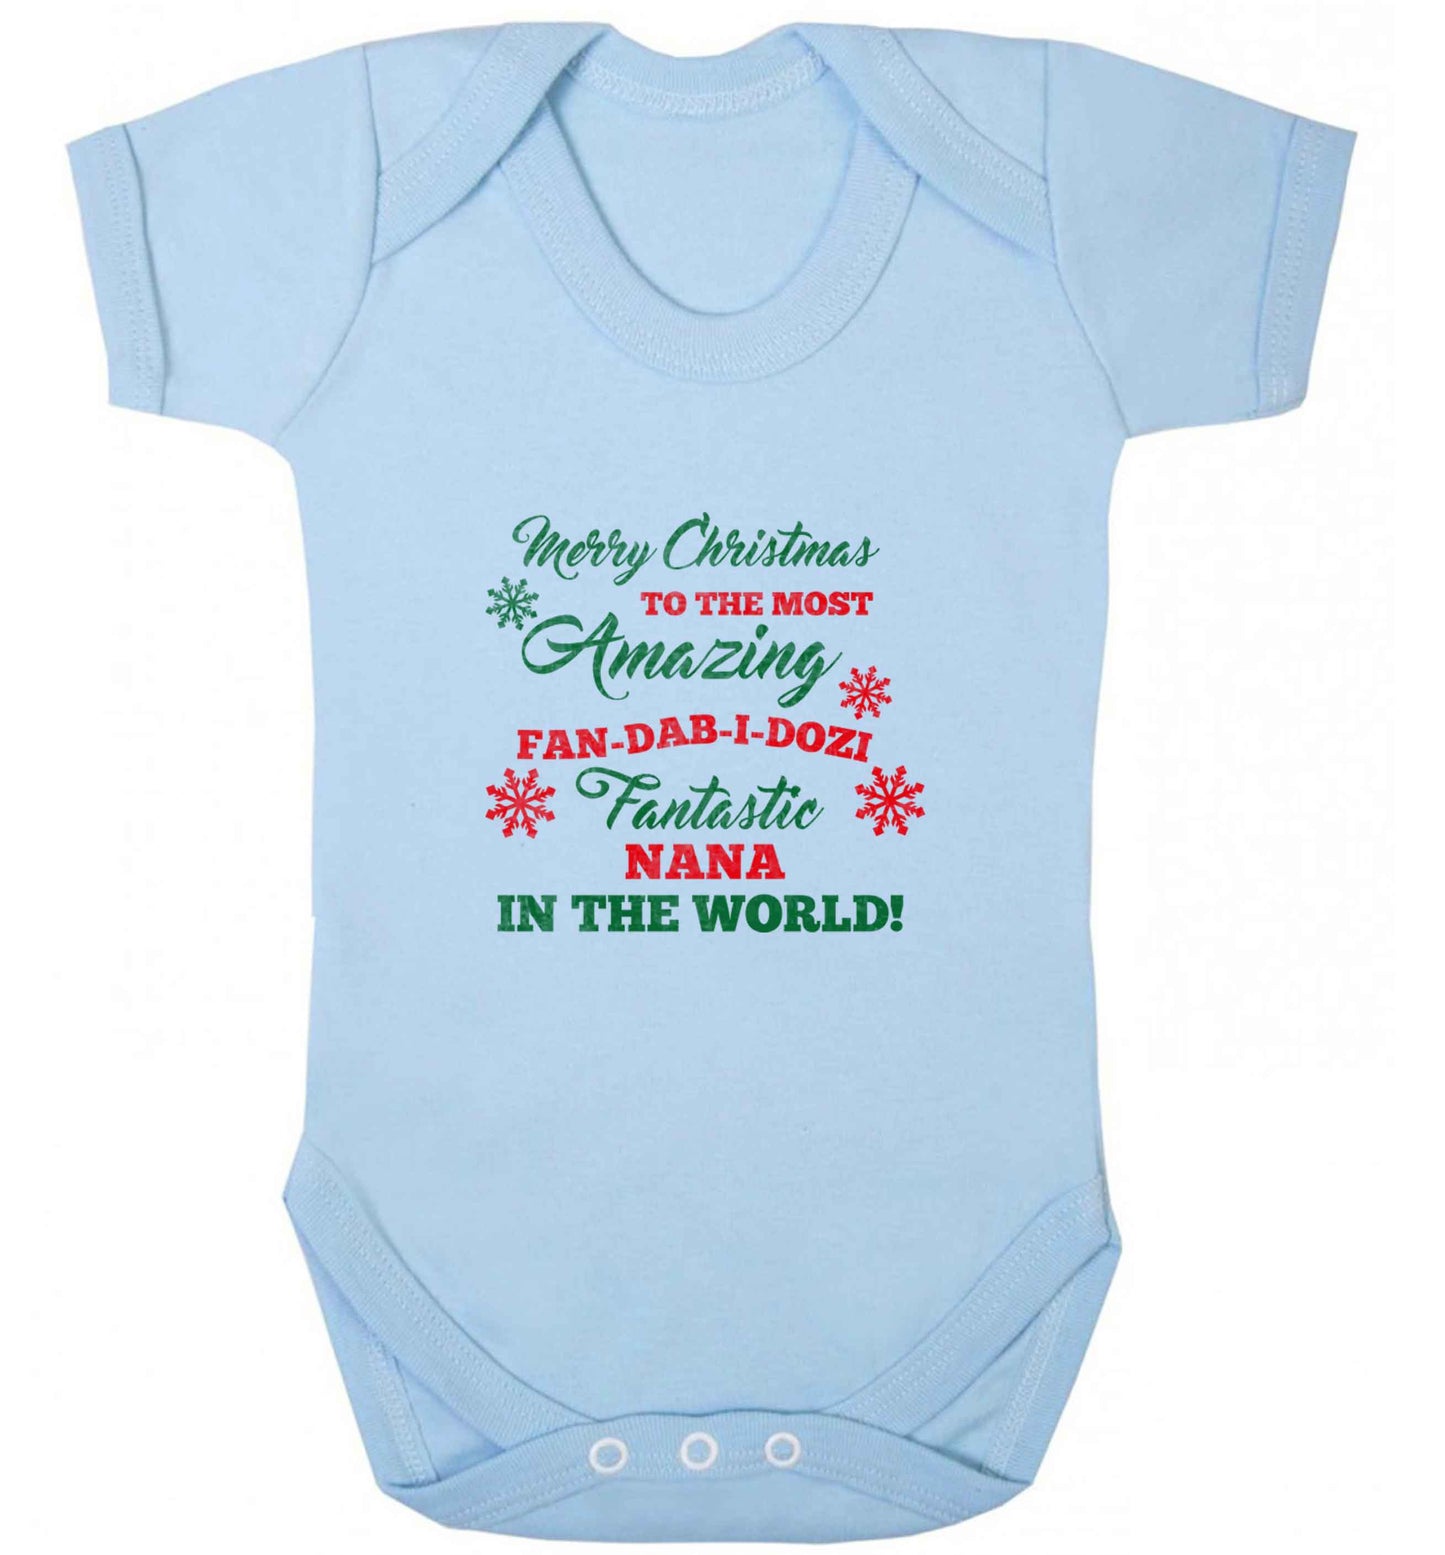 Merry Christmas to the most amazing fan-dab-i-dozi fantasic Nana in the world baby vest pale blue 18-24 months